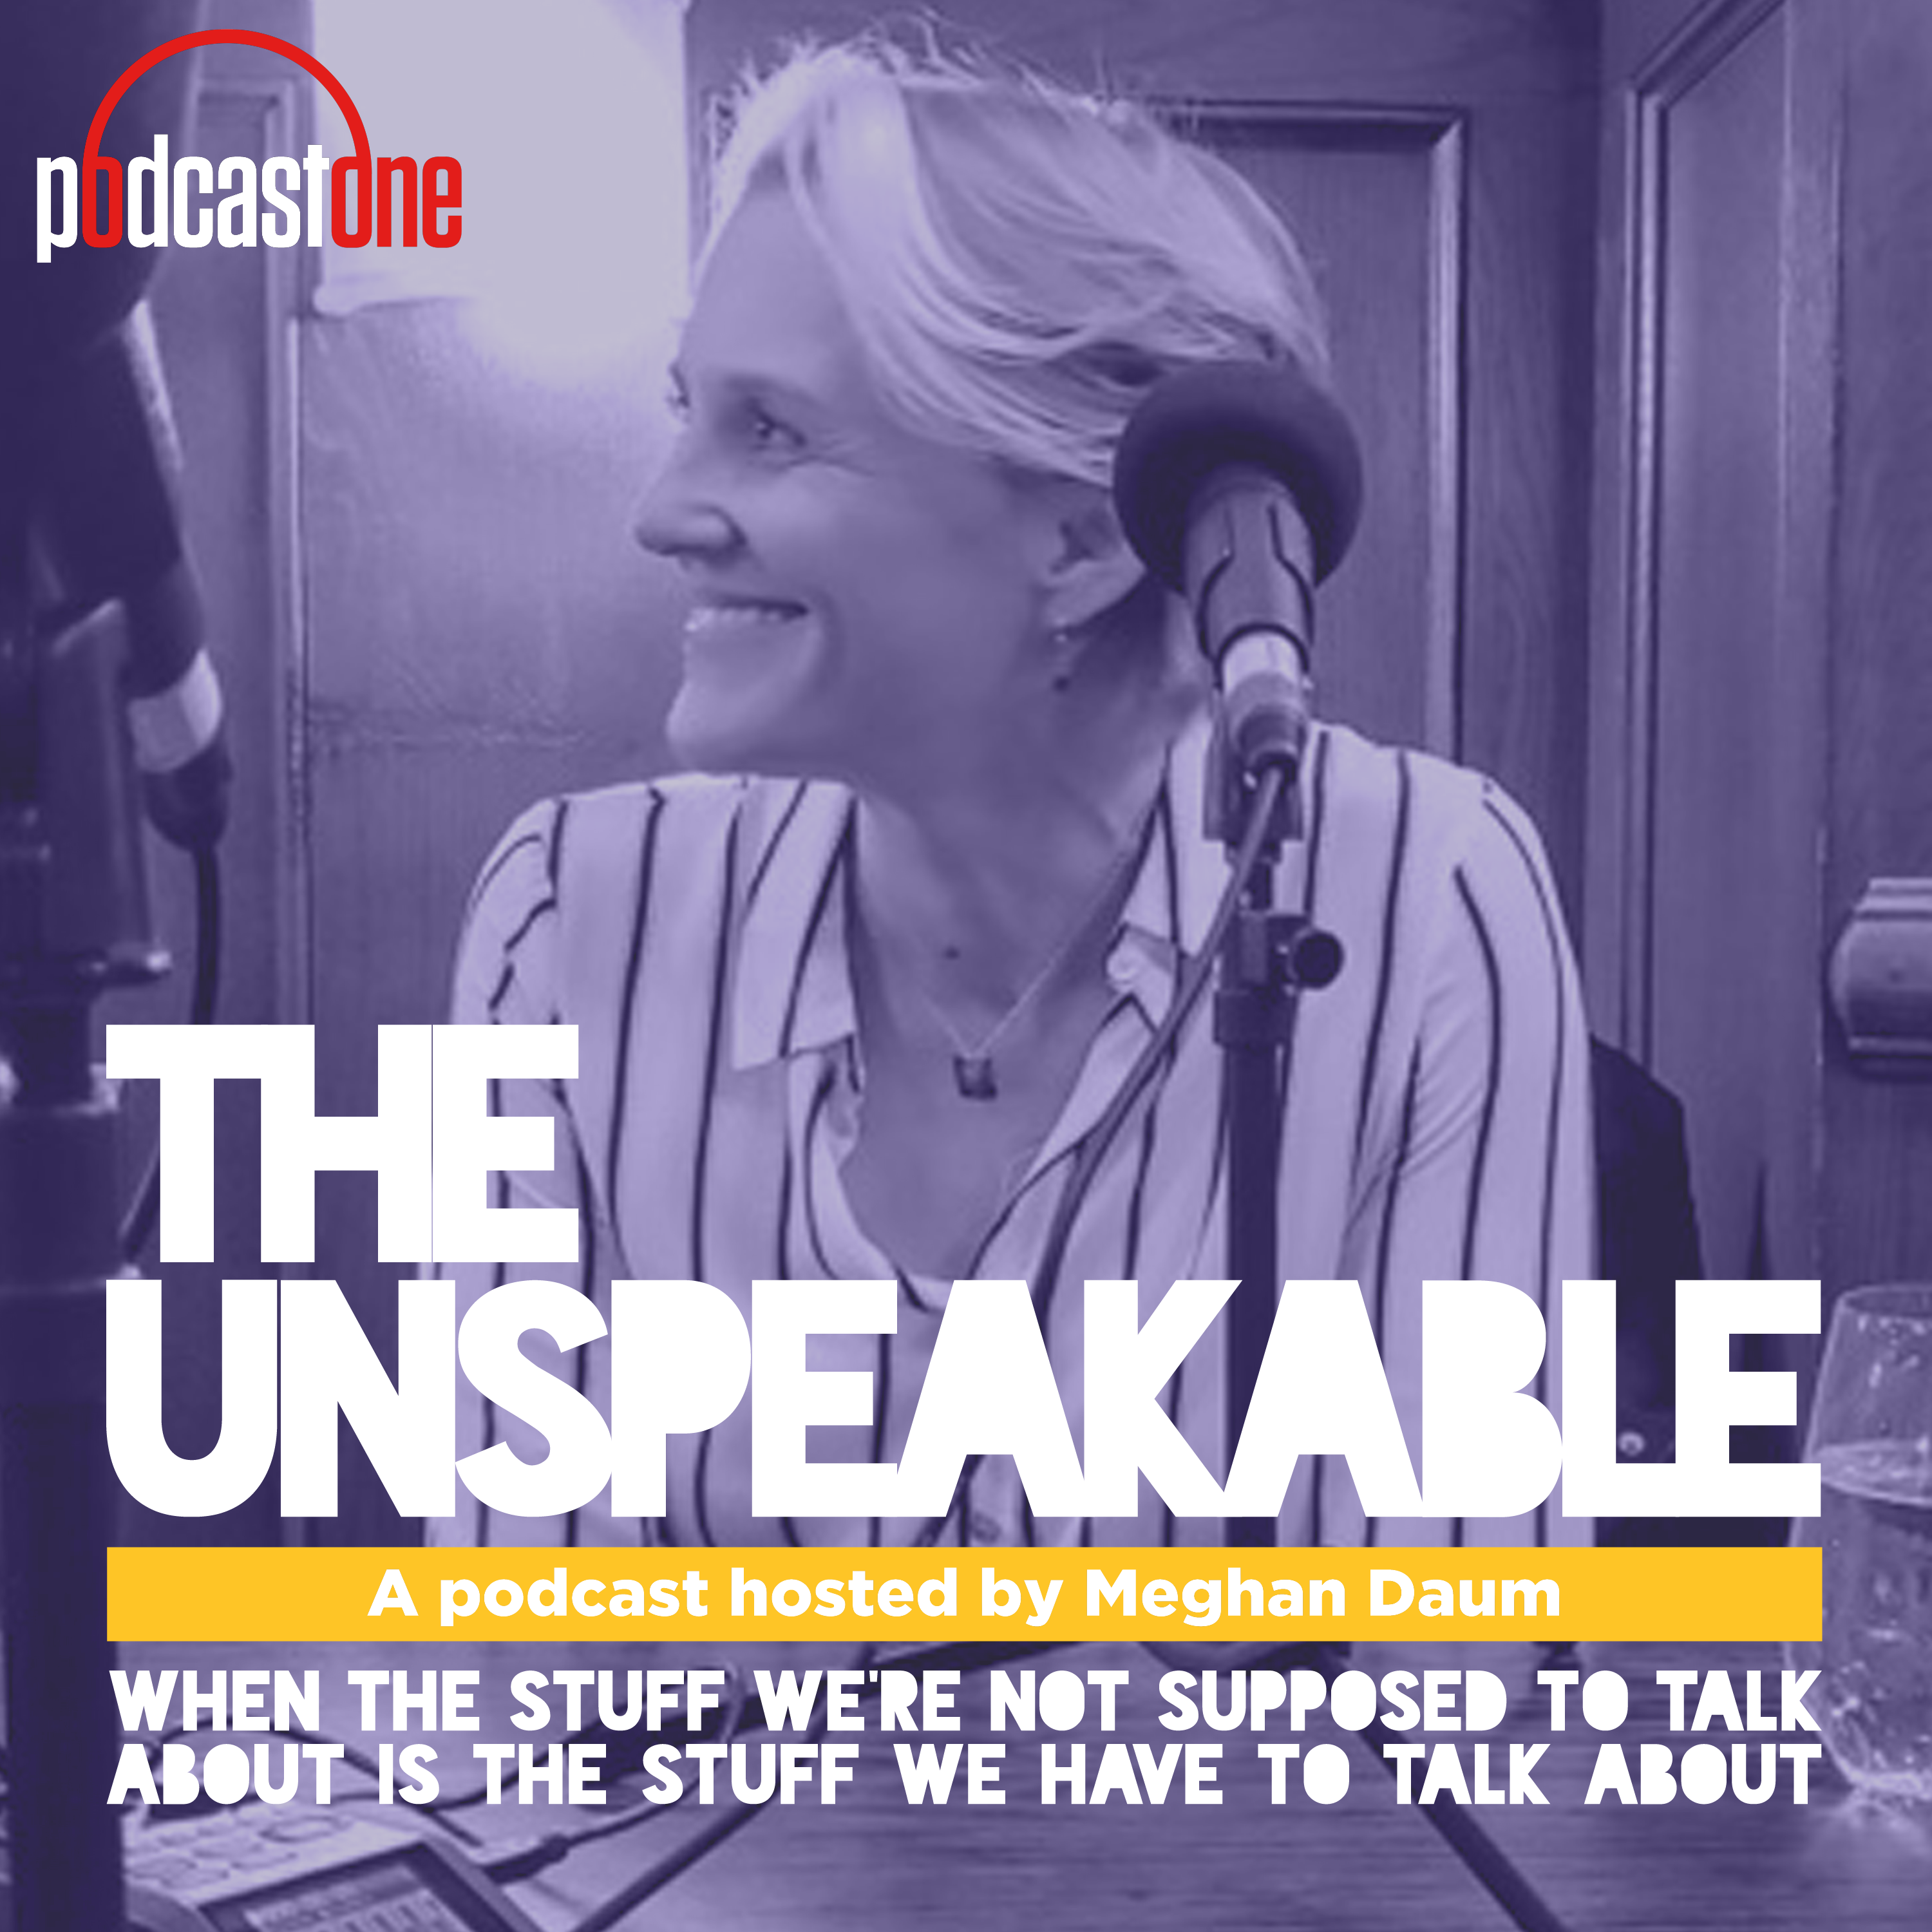 The Unspeakable Podcast